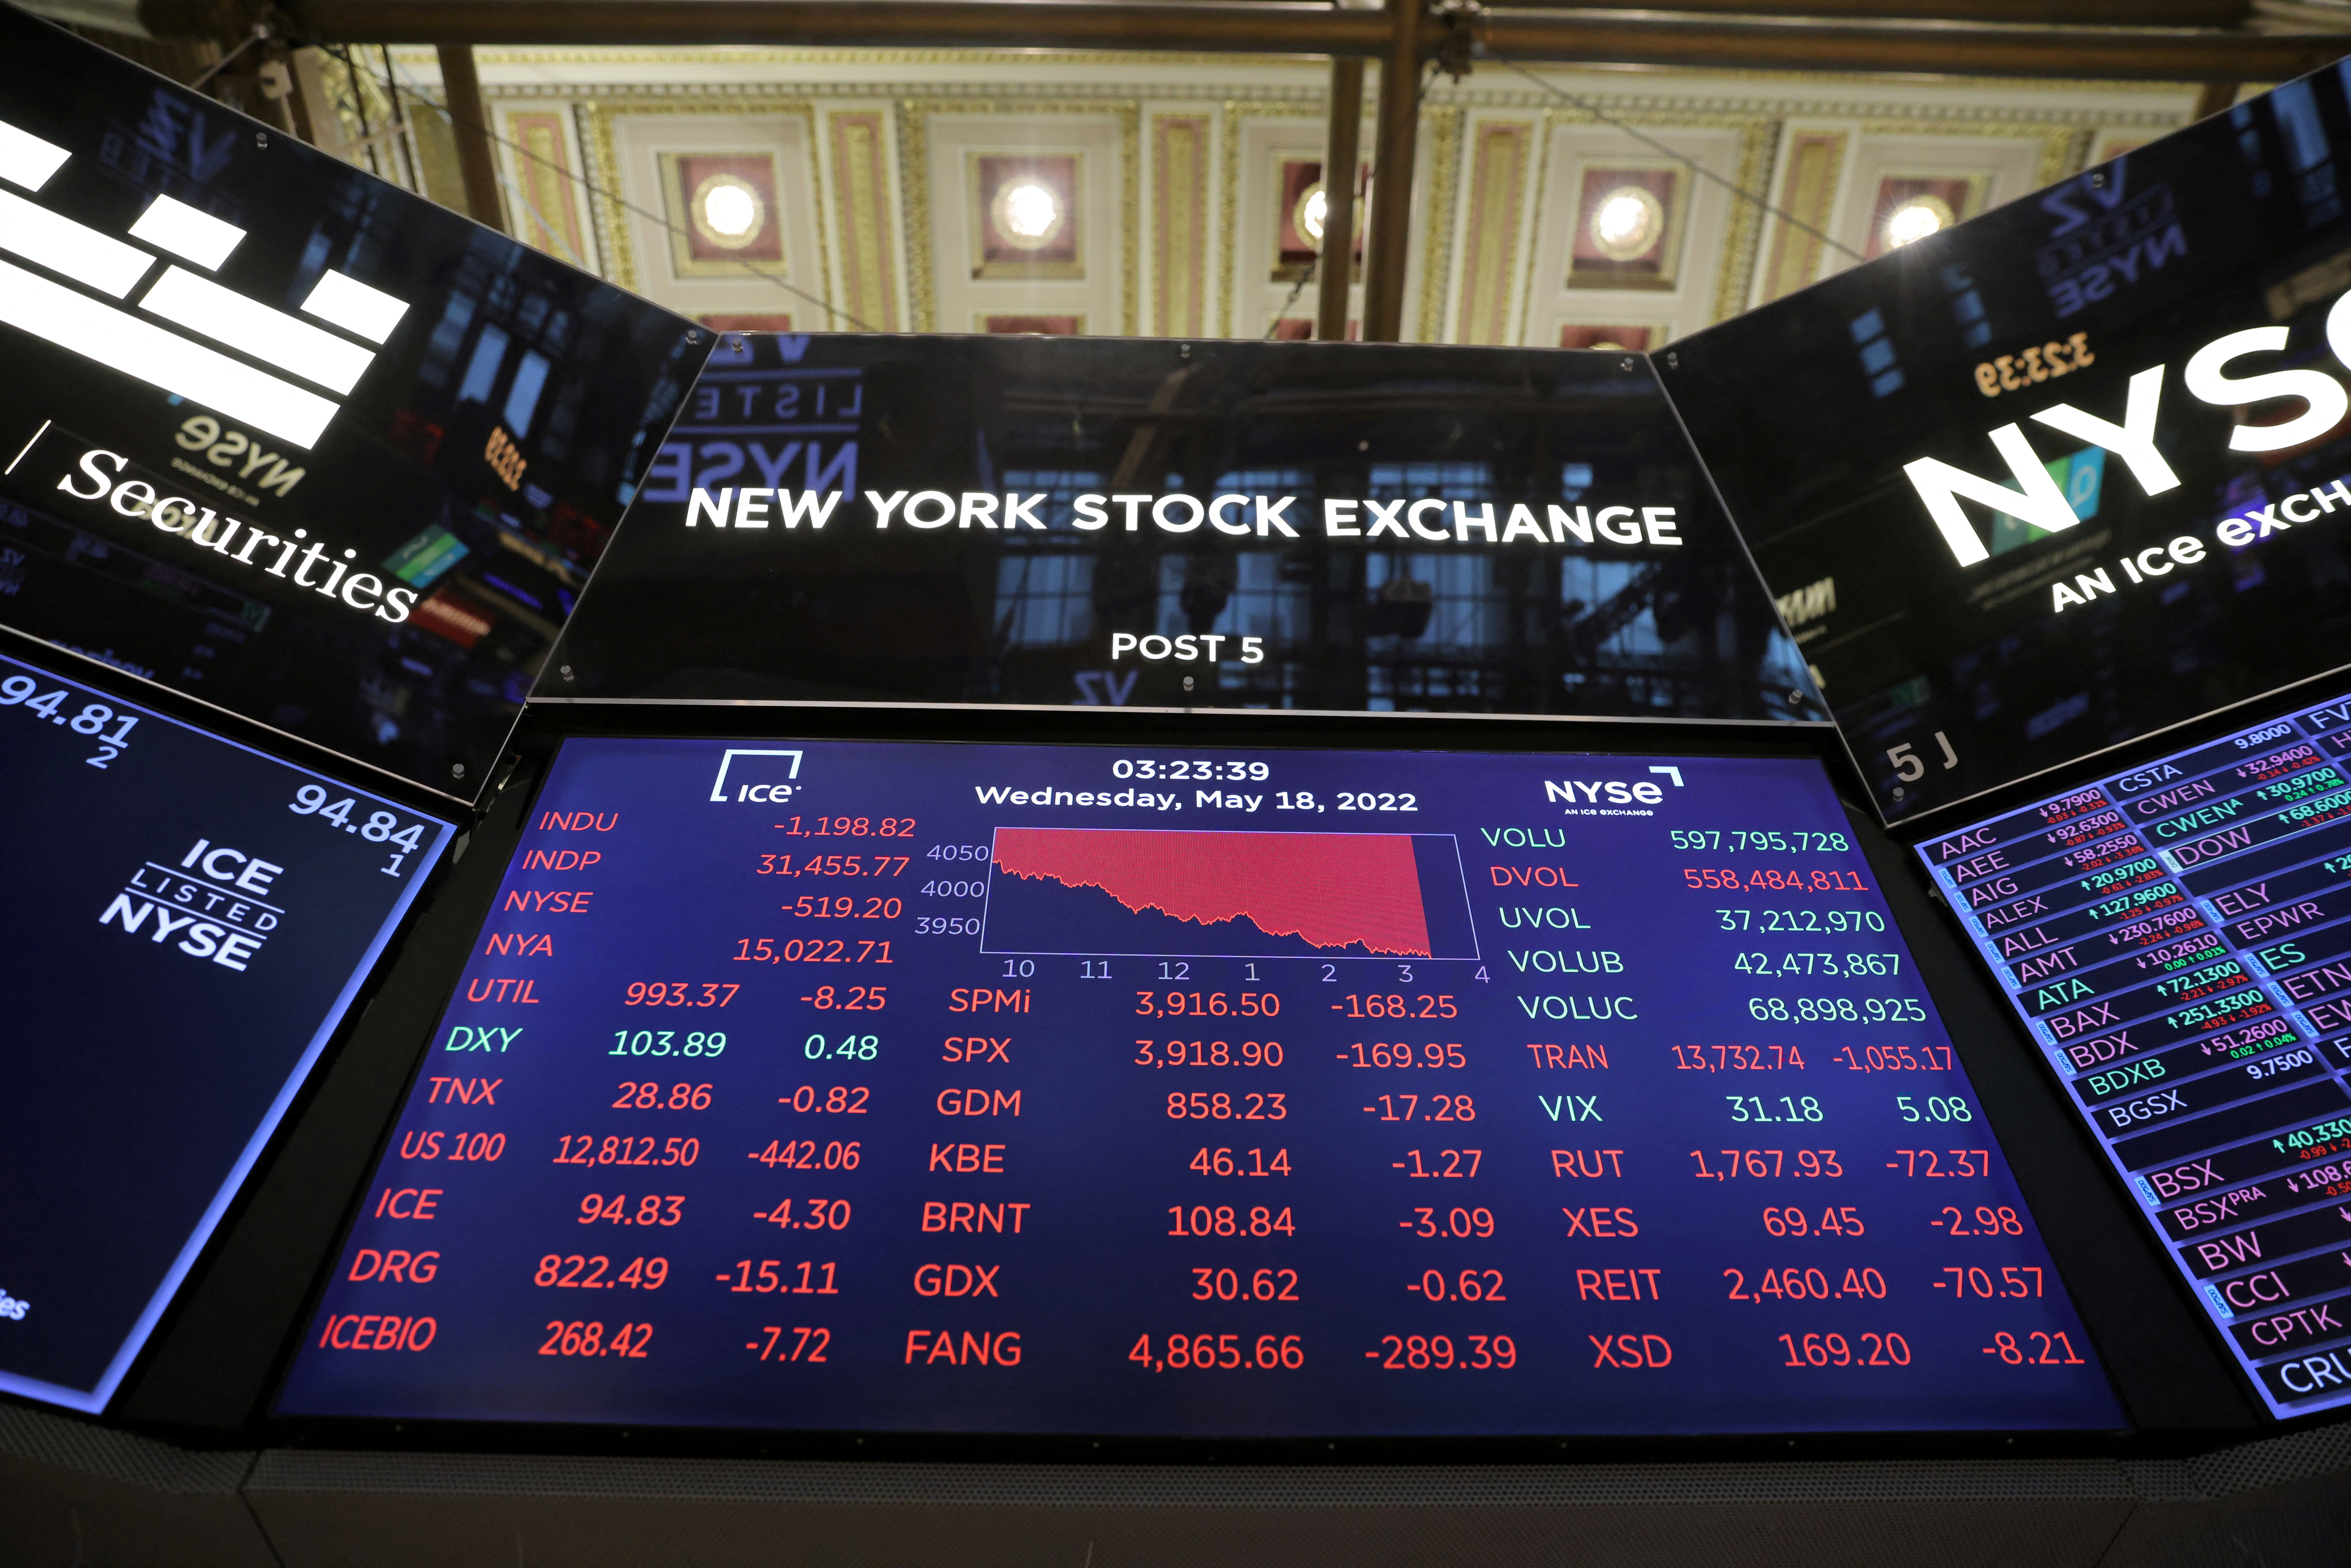 A monitor displays stock market information on the trading floor at the New York Stock Exchange (NYSE) in Manhattan, New York City